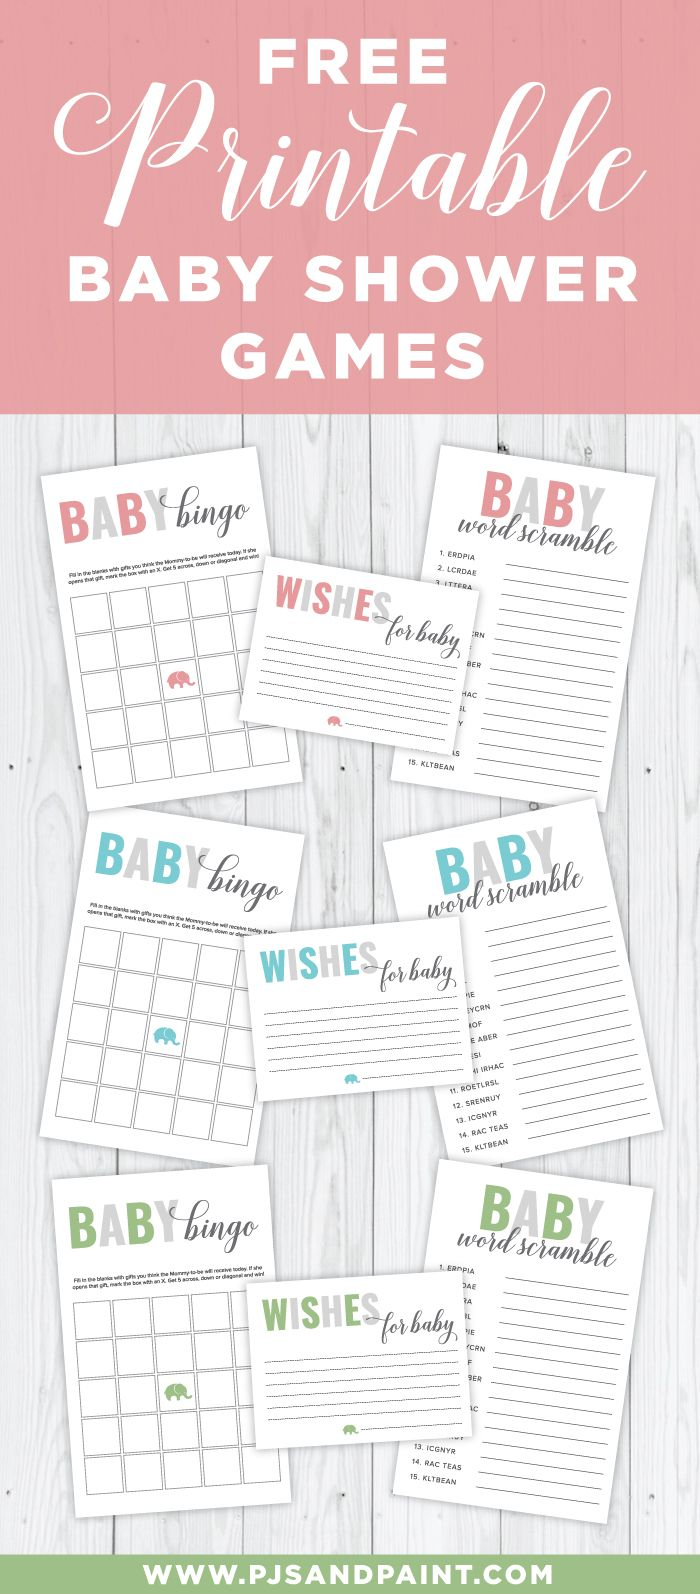 Free Printable Baby Shower Games Pjs And Paint Volume 